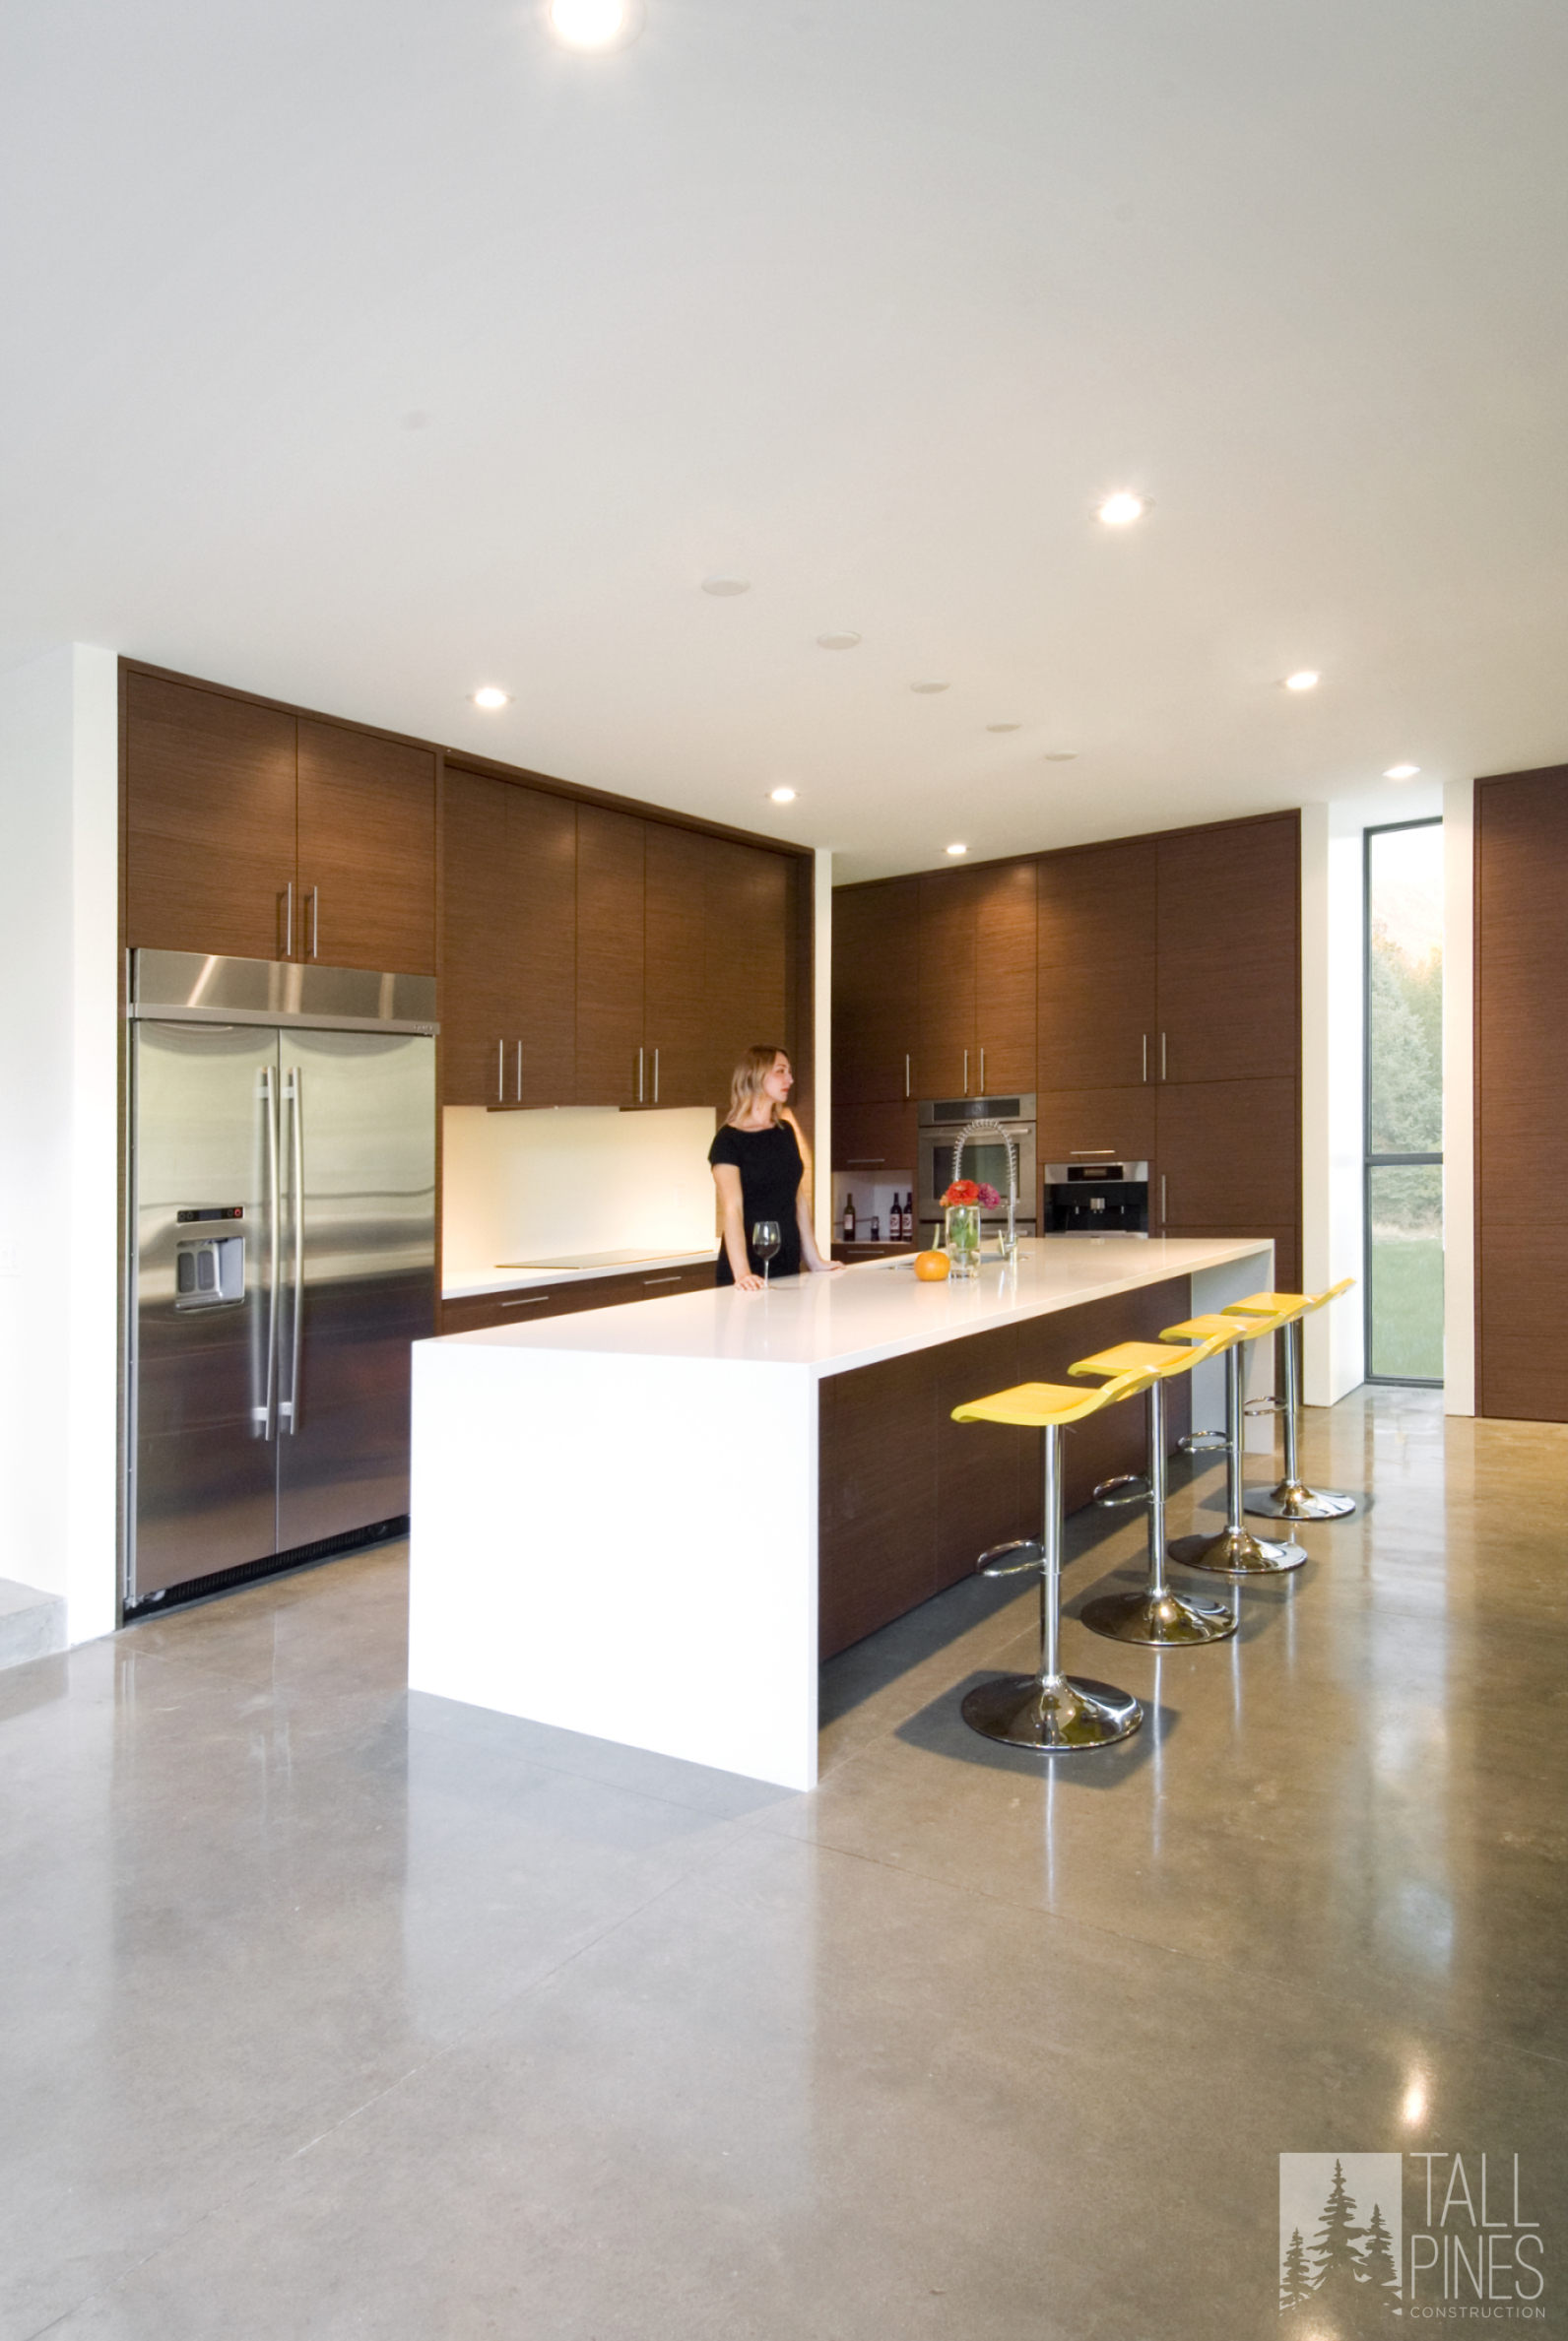 Kitchen flooded with natural light and modern design